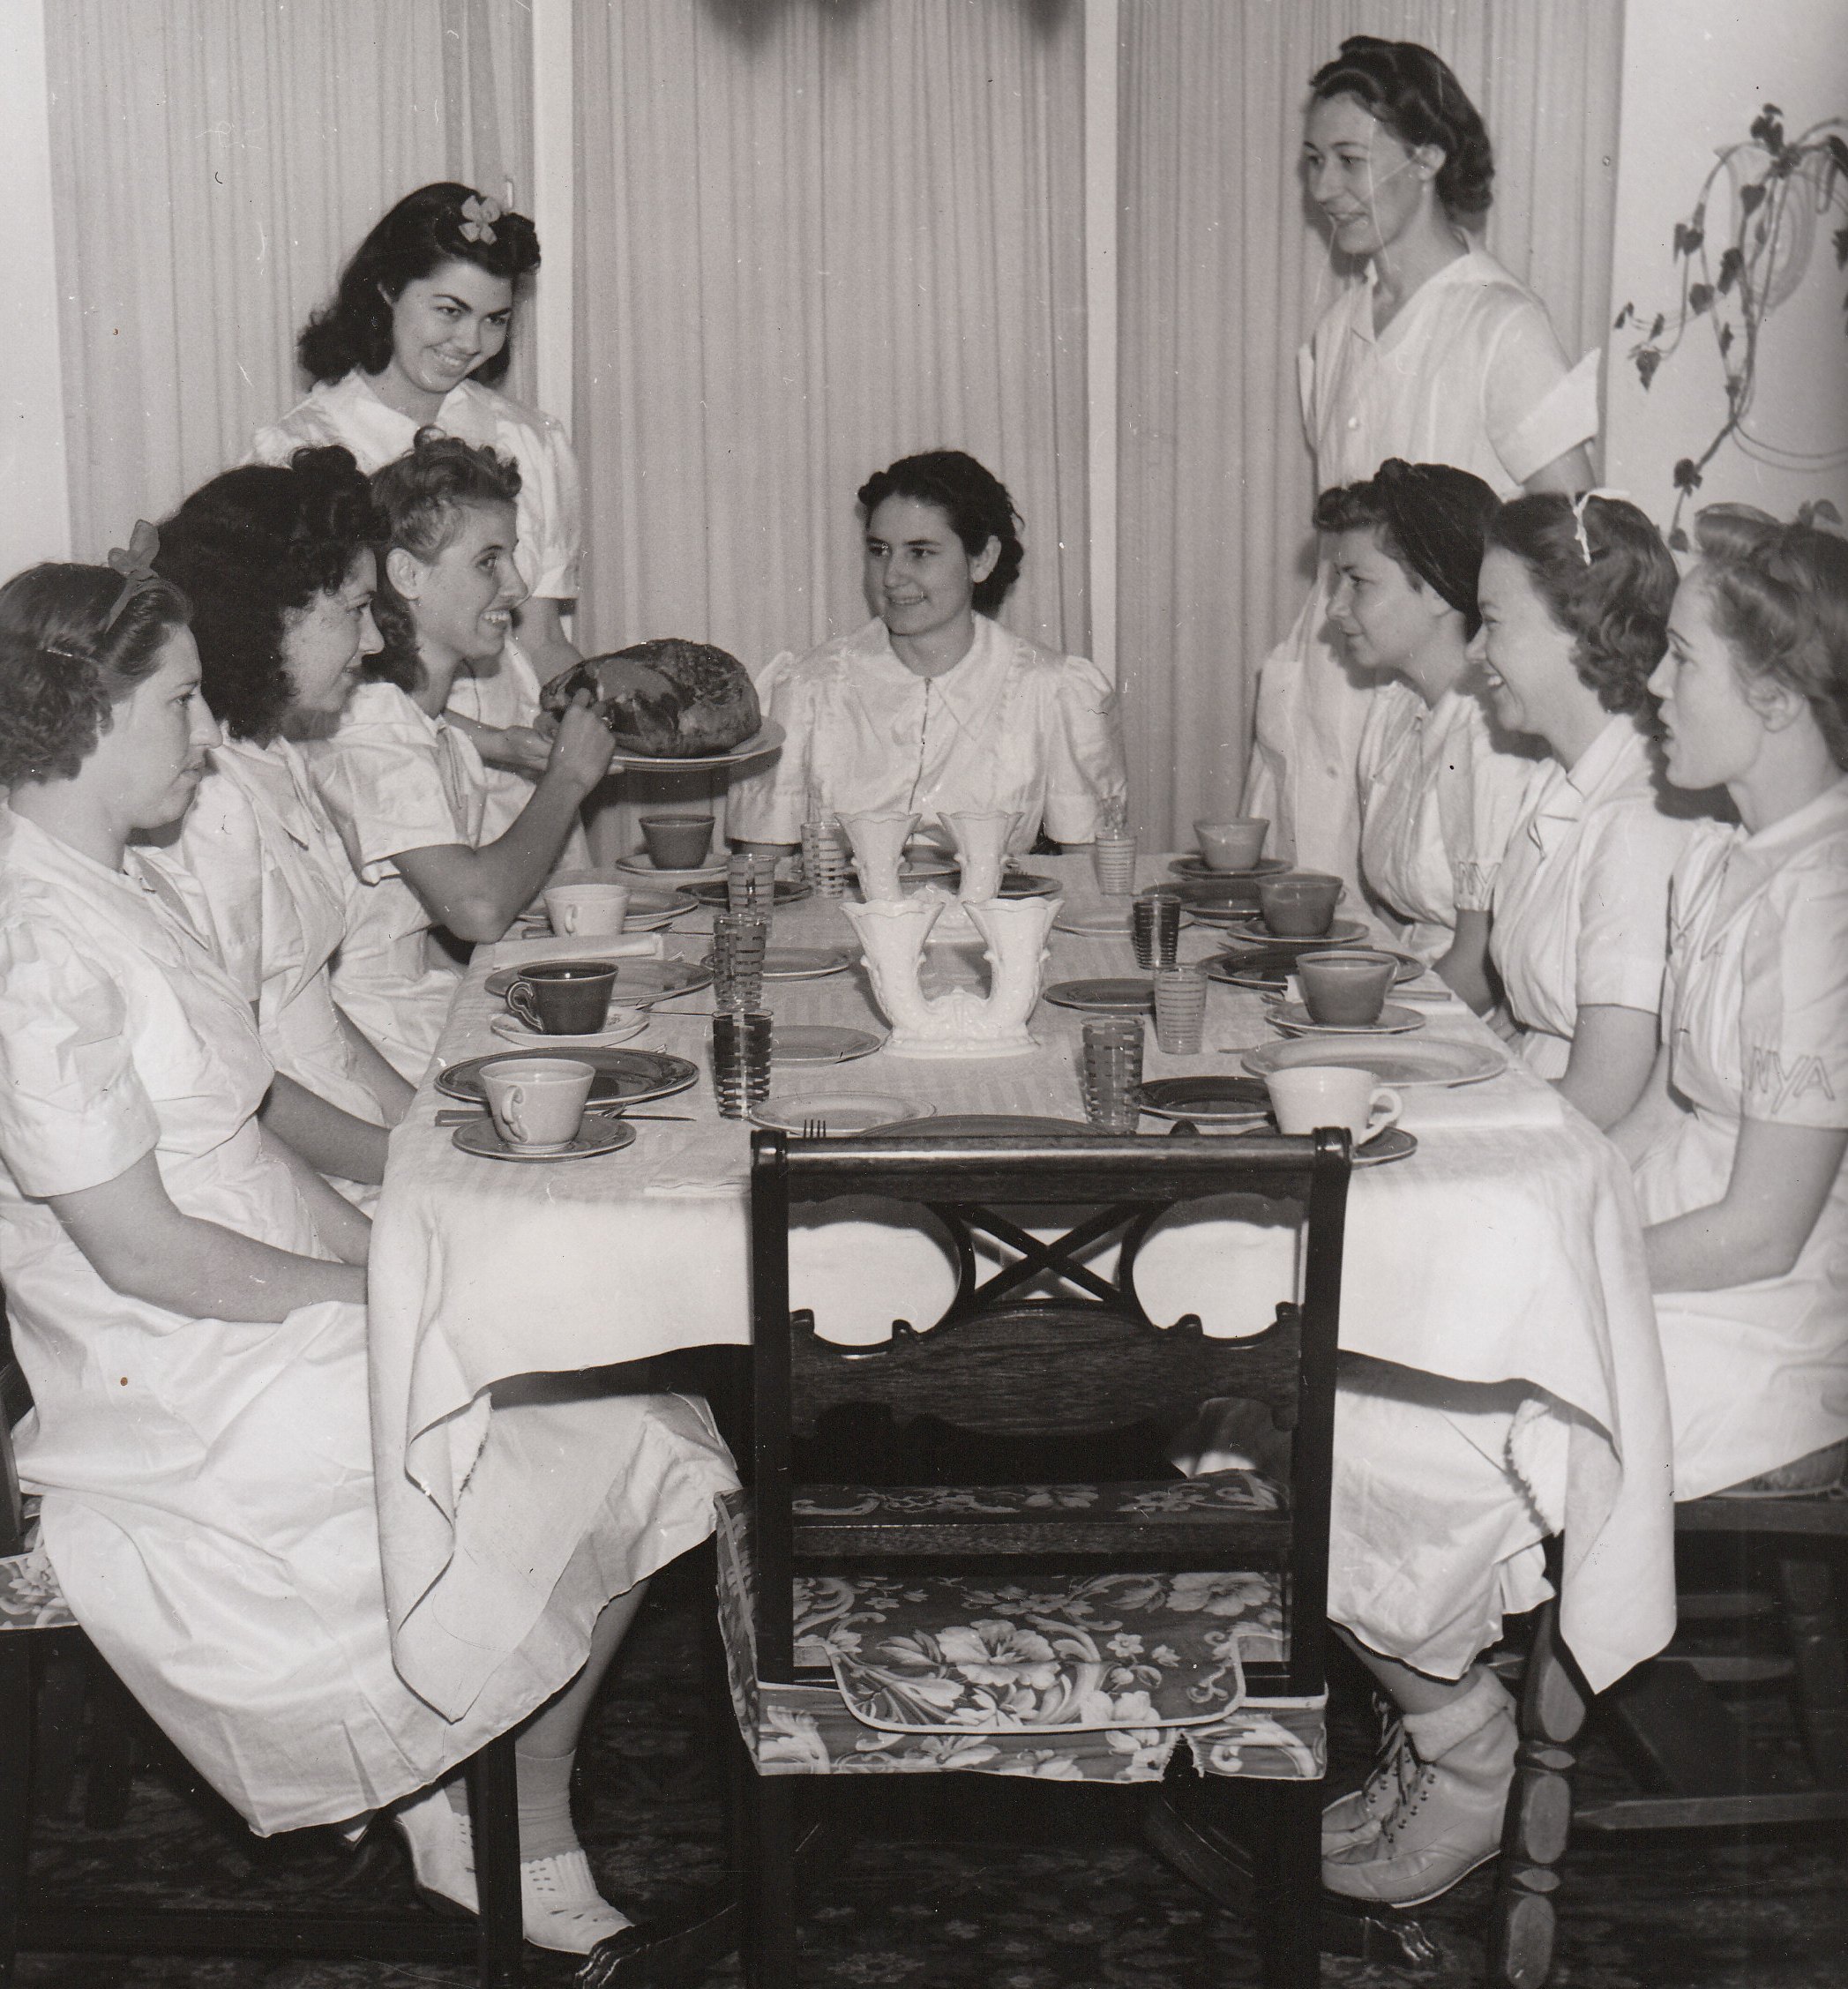 Young women training to be domestic workers in South Gate, California, get ready to enjoy the fruits of their labor. Photo courtesy of the National Archives (ca. 1935-1943).